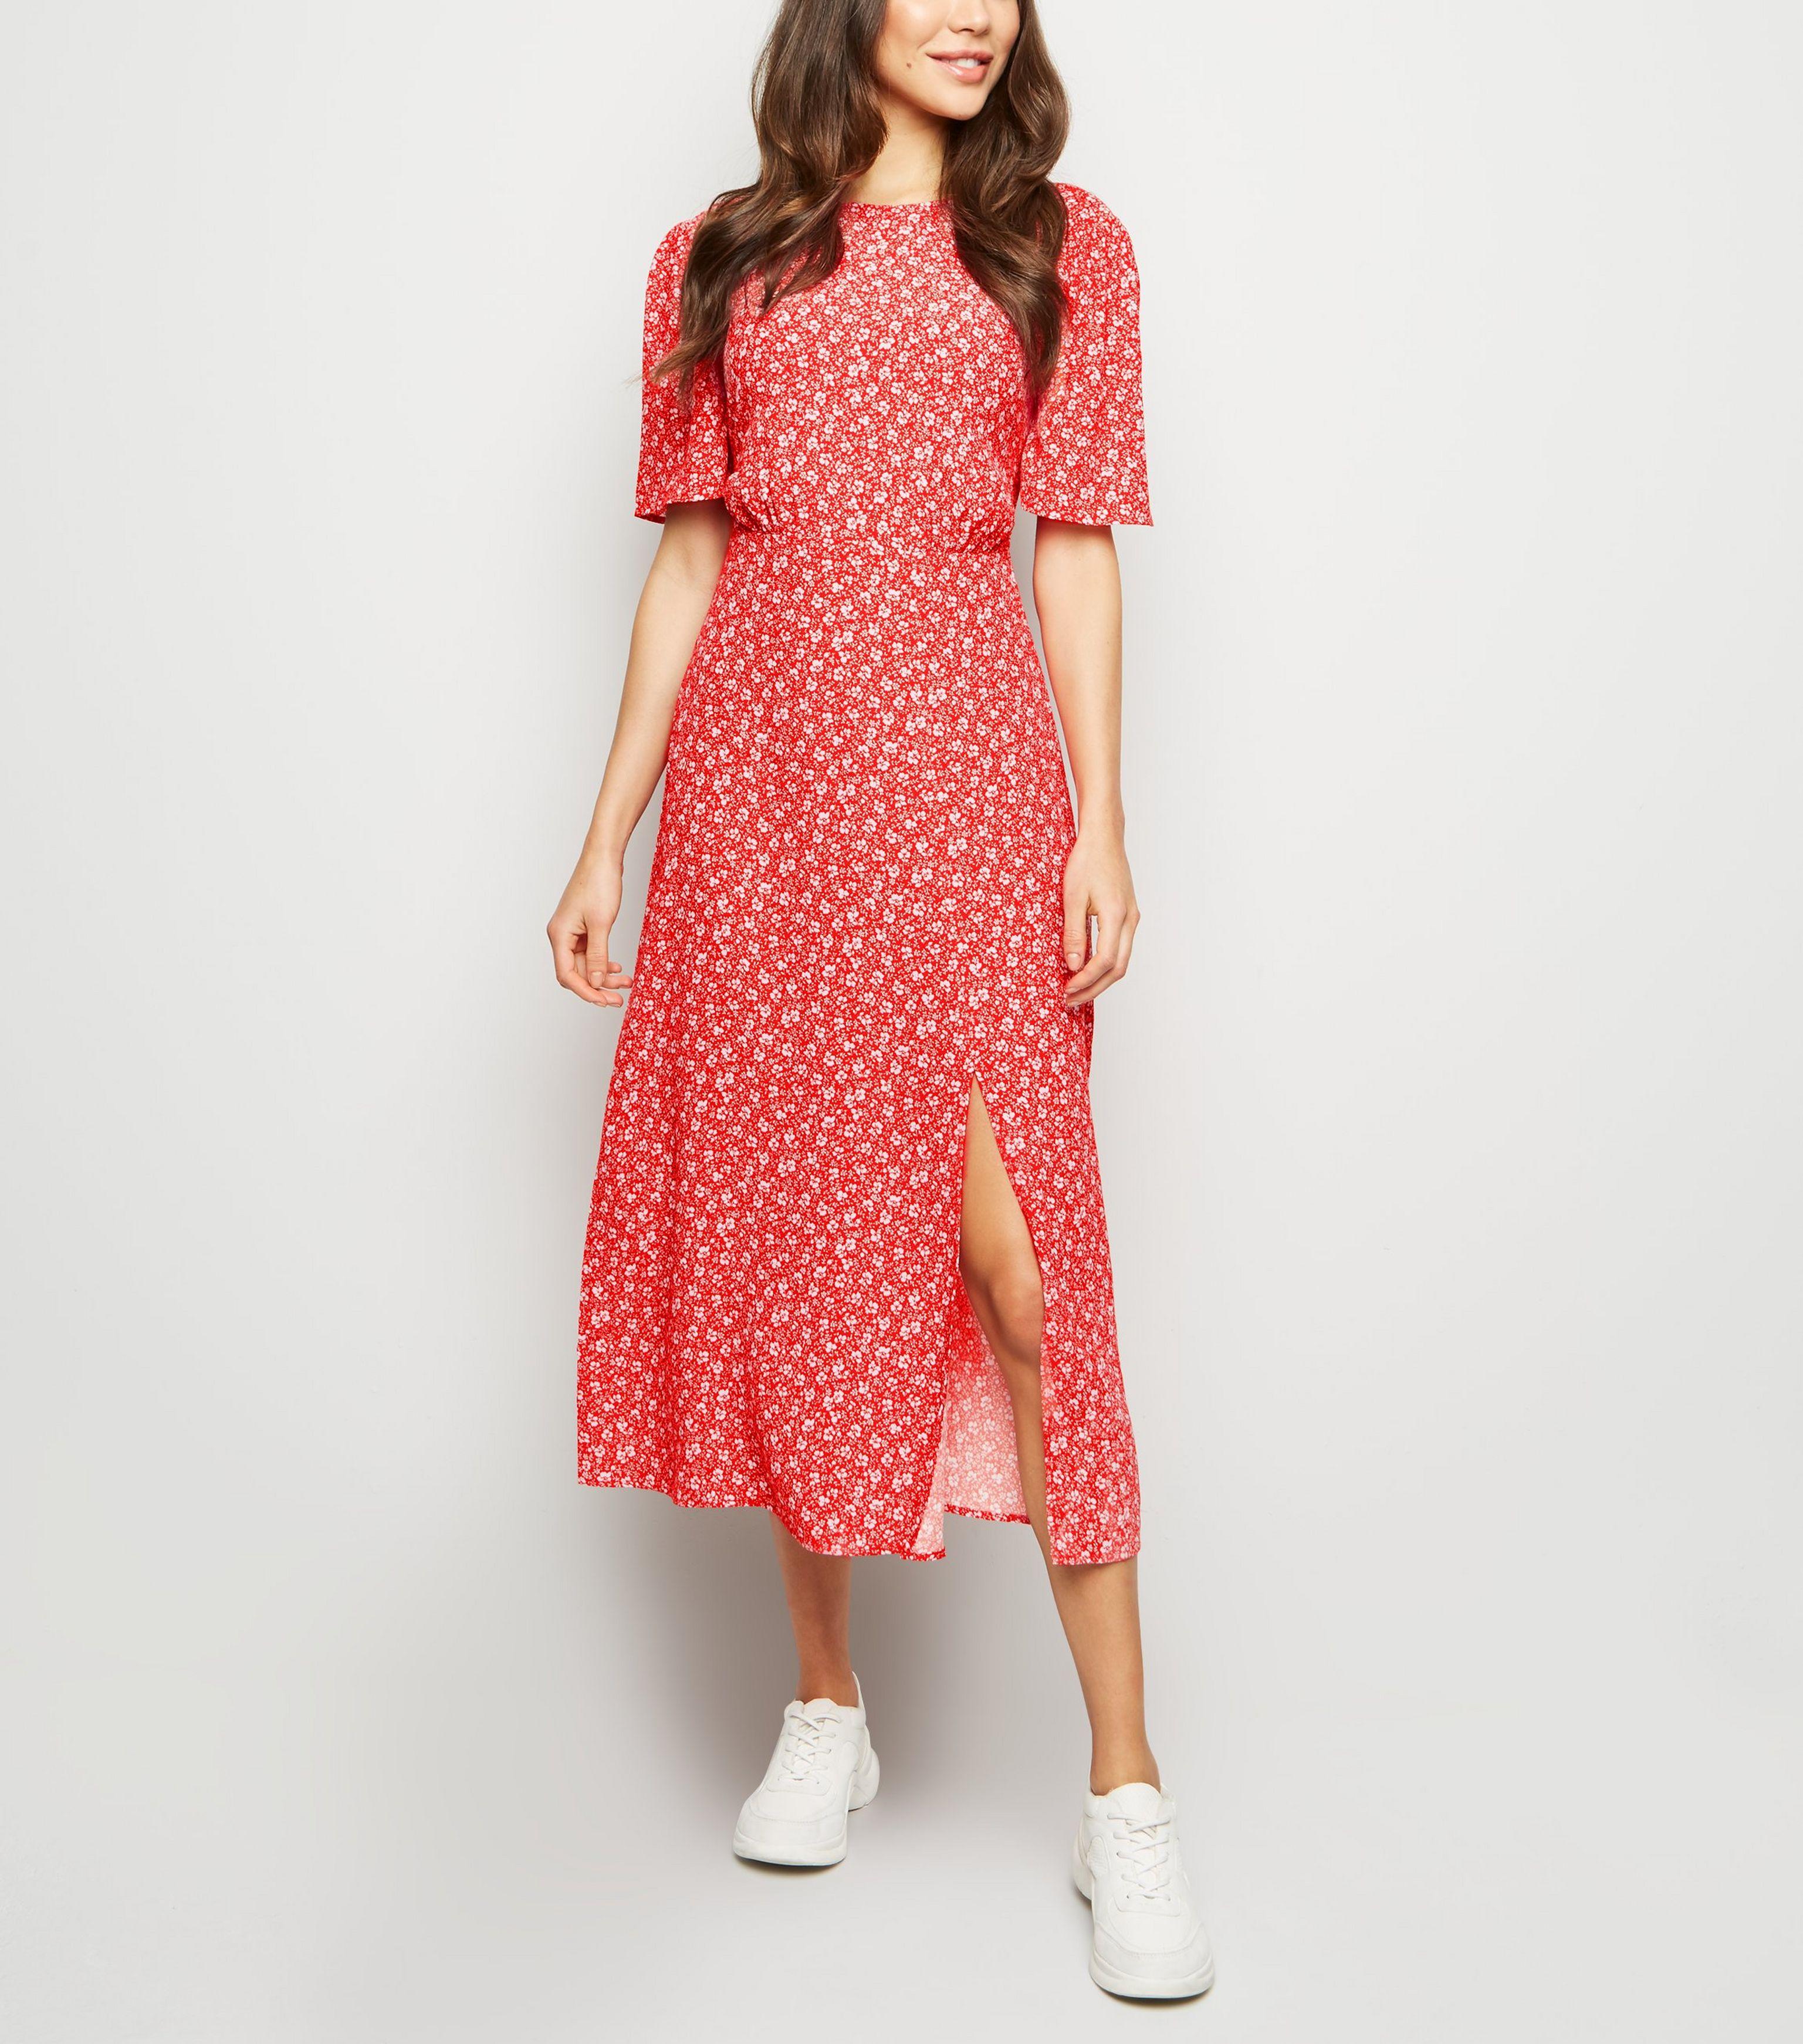 New Look Ditsy Floral Dress Online ...